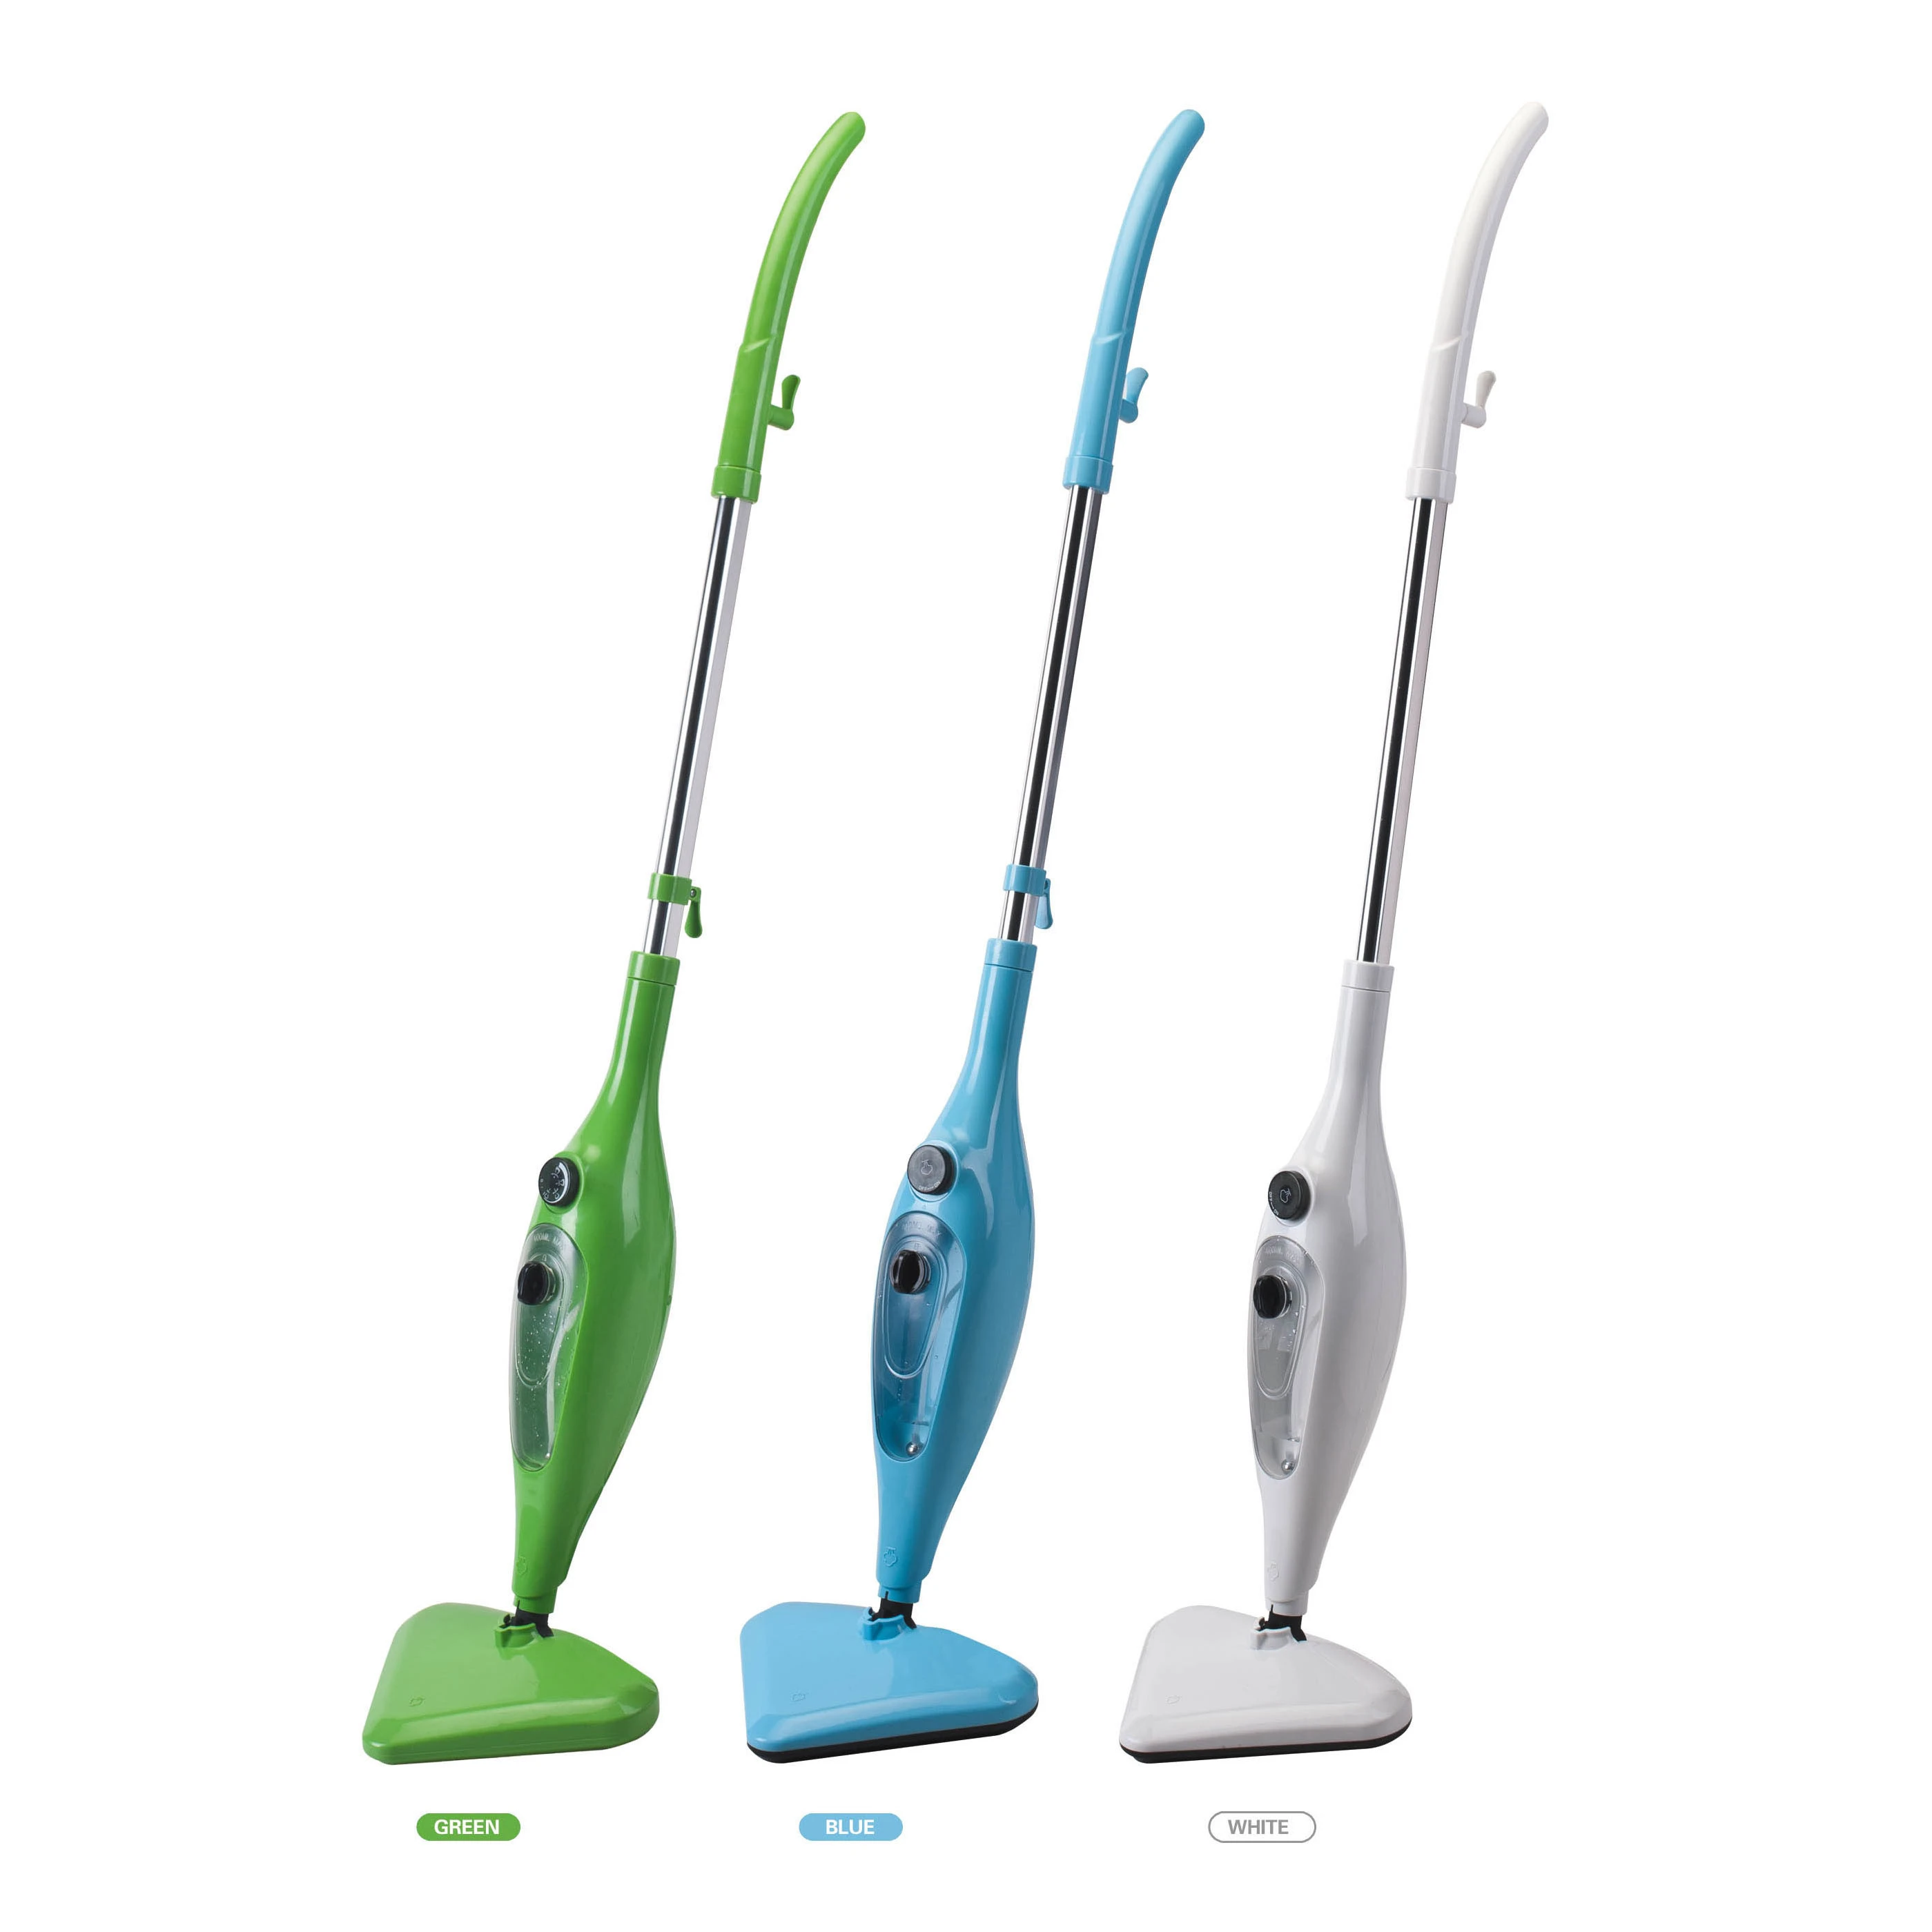 Yuexiang professional steam cleaner steam mop For Home